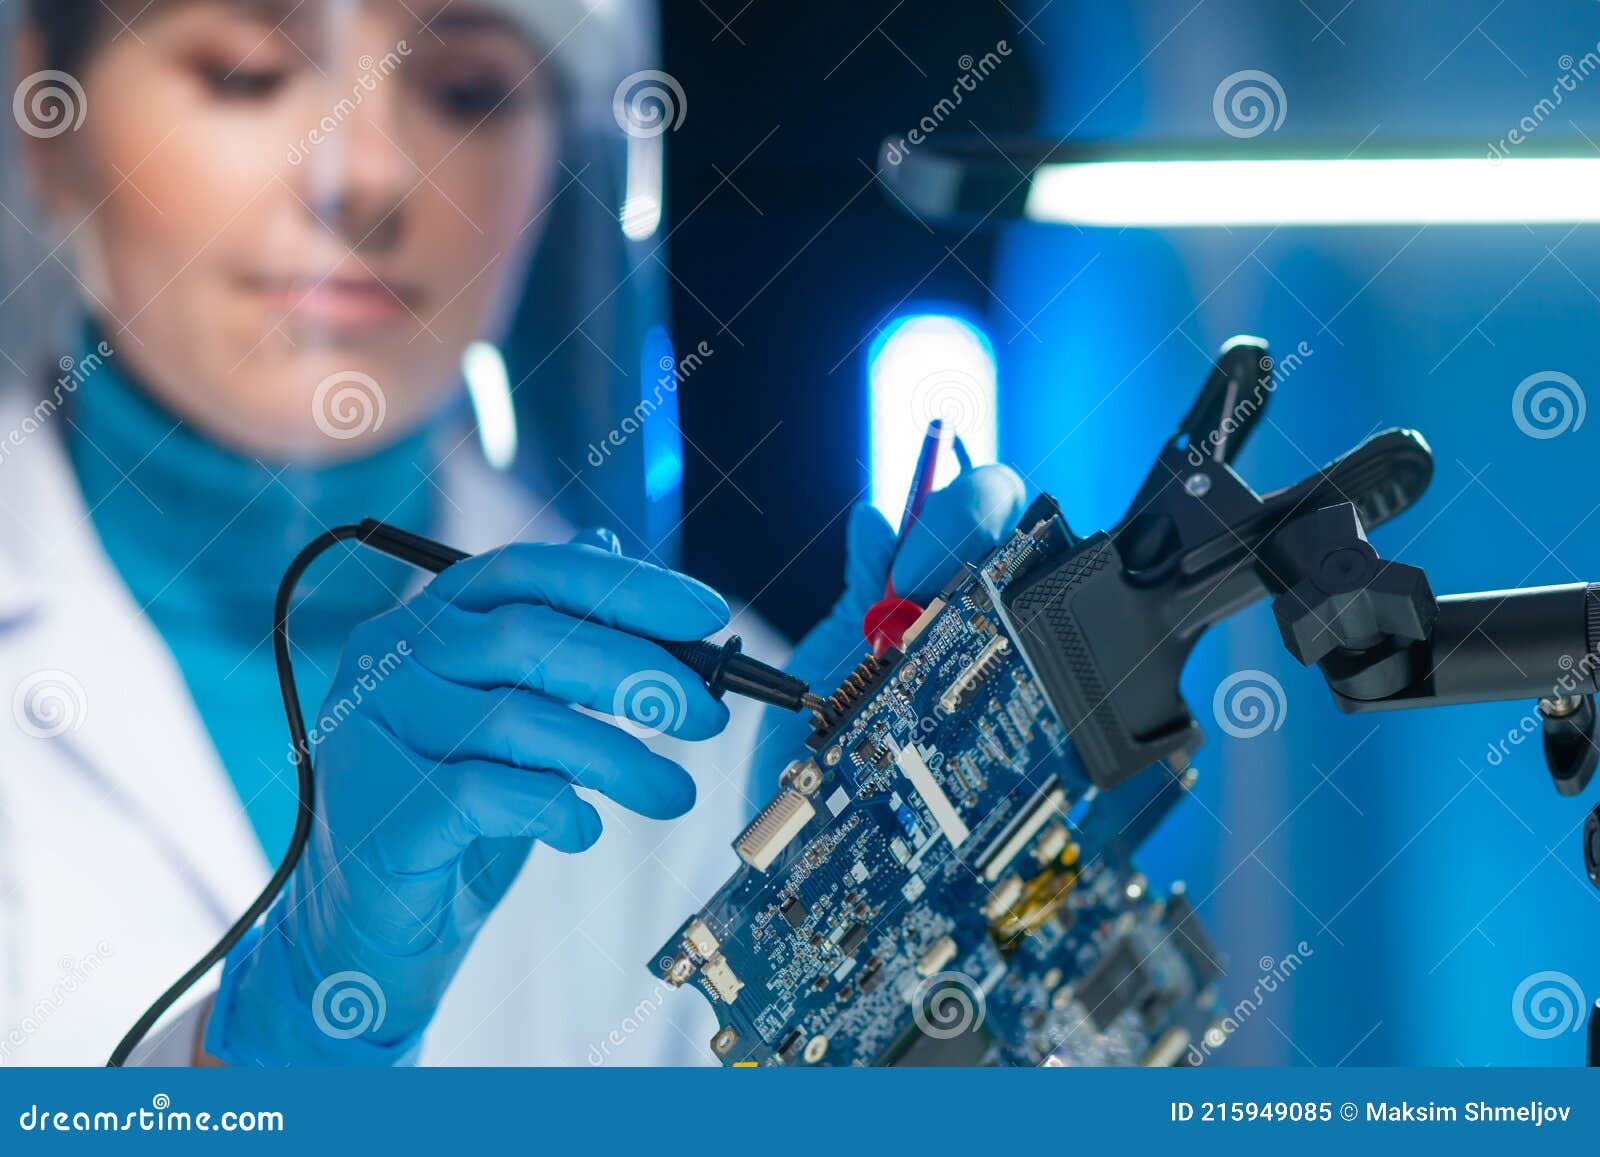 female microelectronics engineer works in a scientific laboratory on computing systems and microprocessors. professional